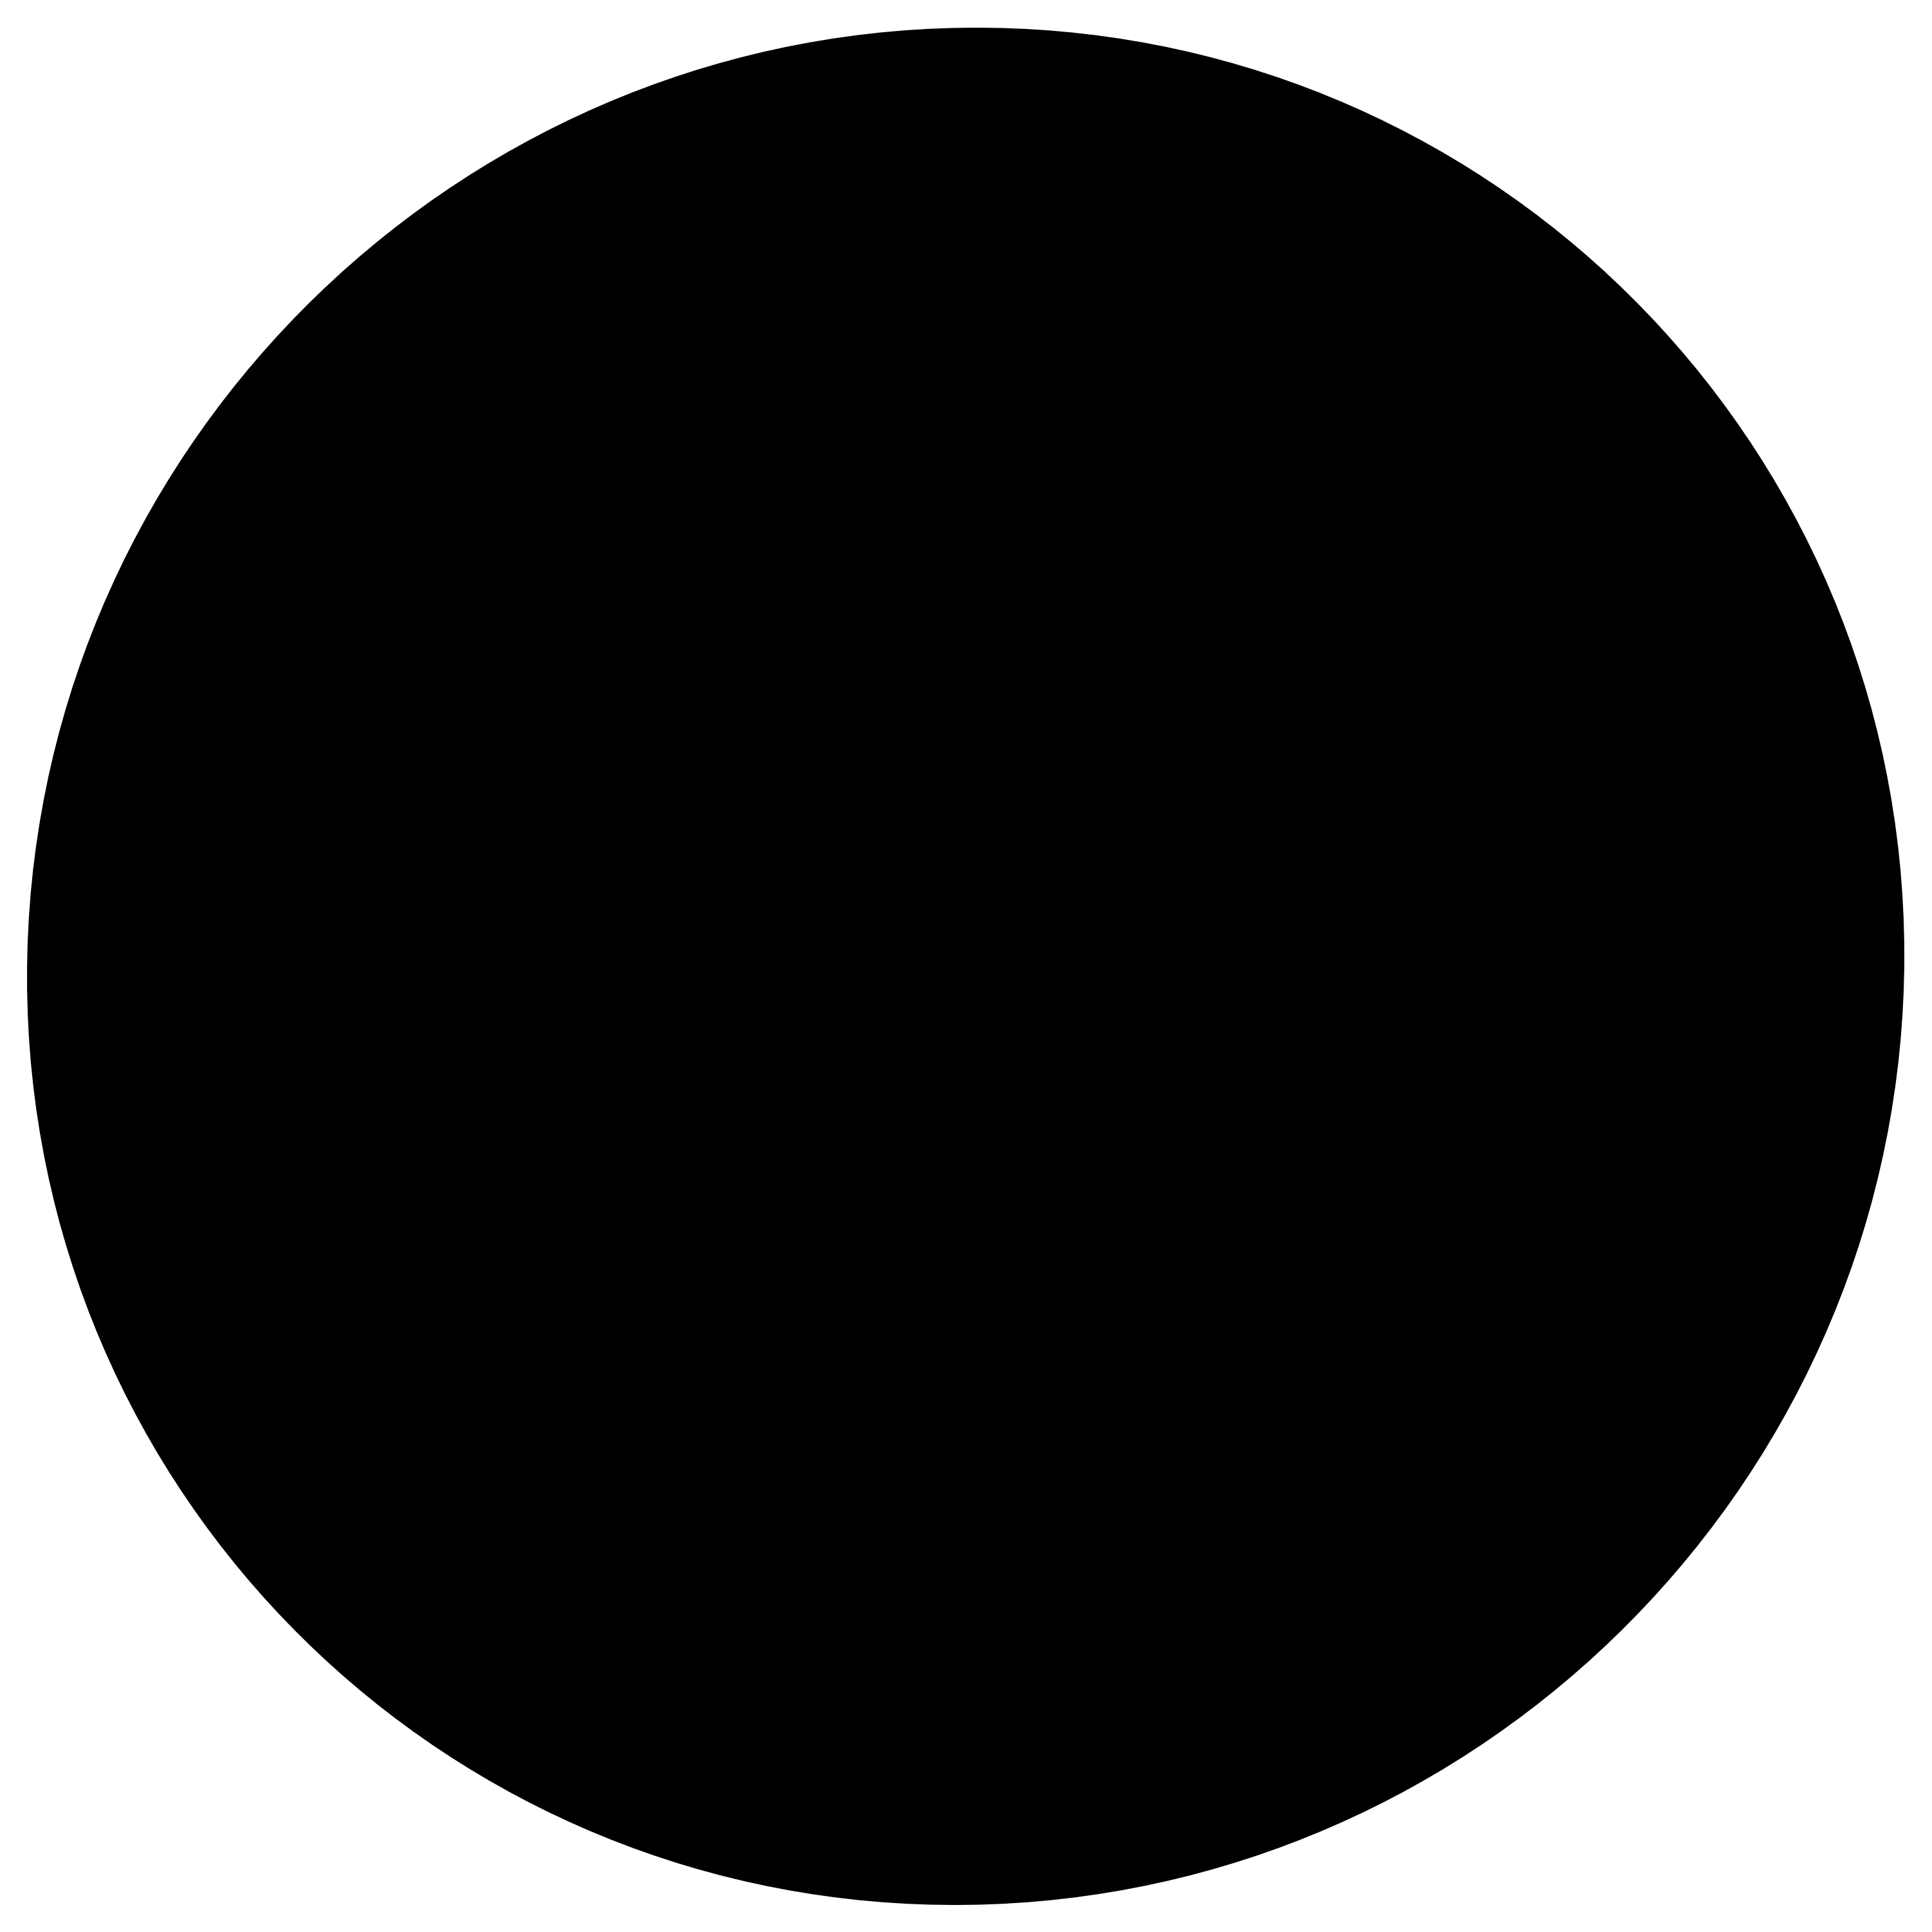 html - Responsively align 50% of a circle on the bottom-center of 